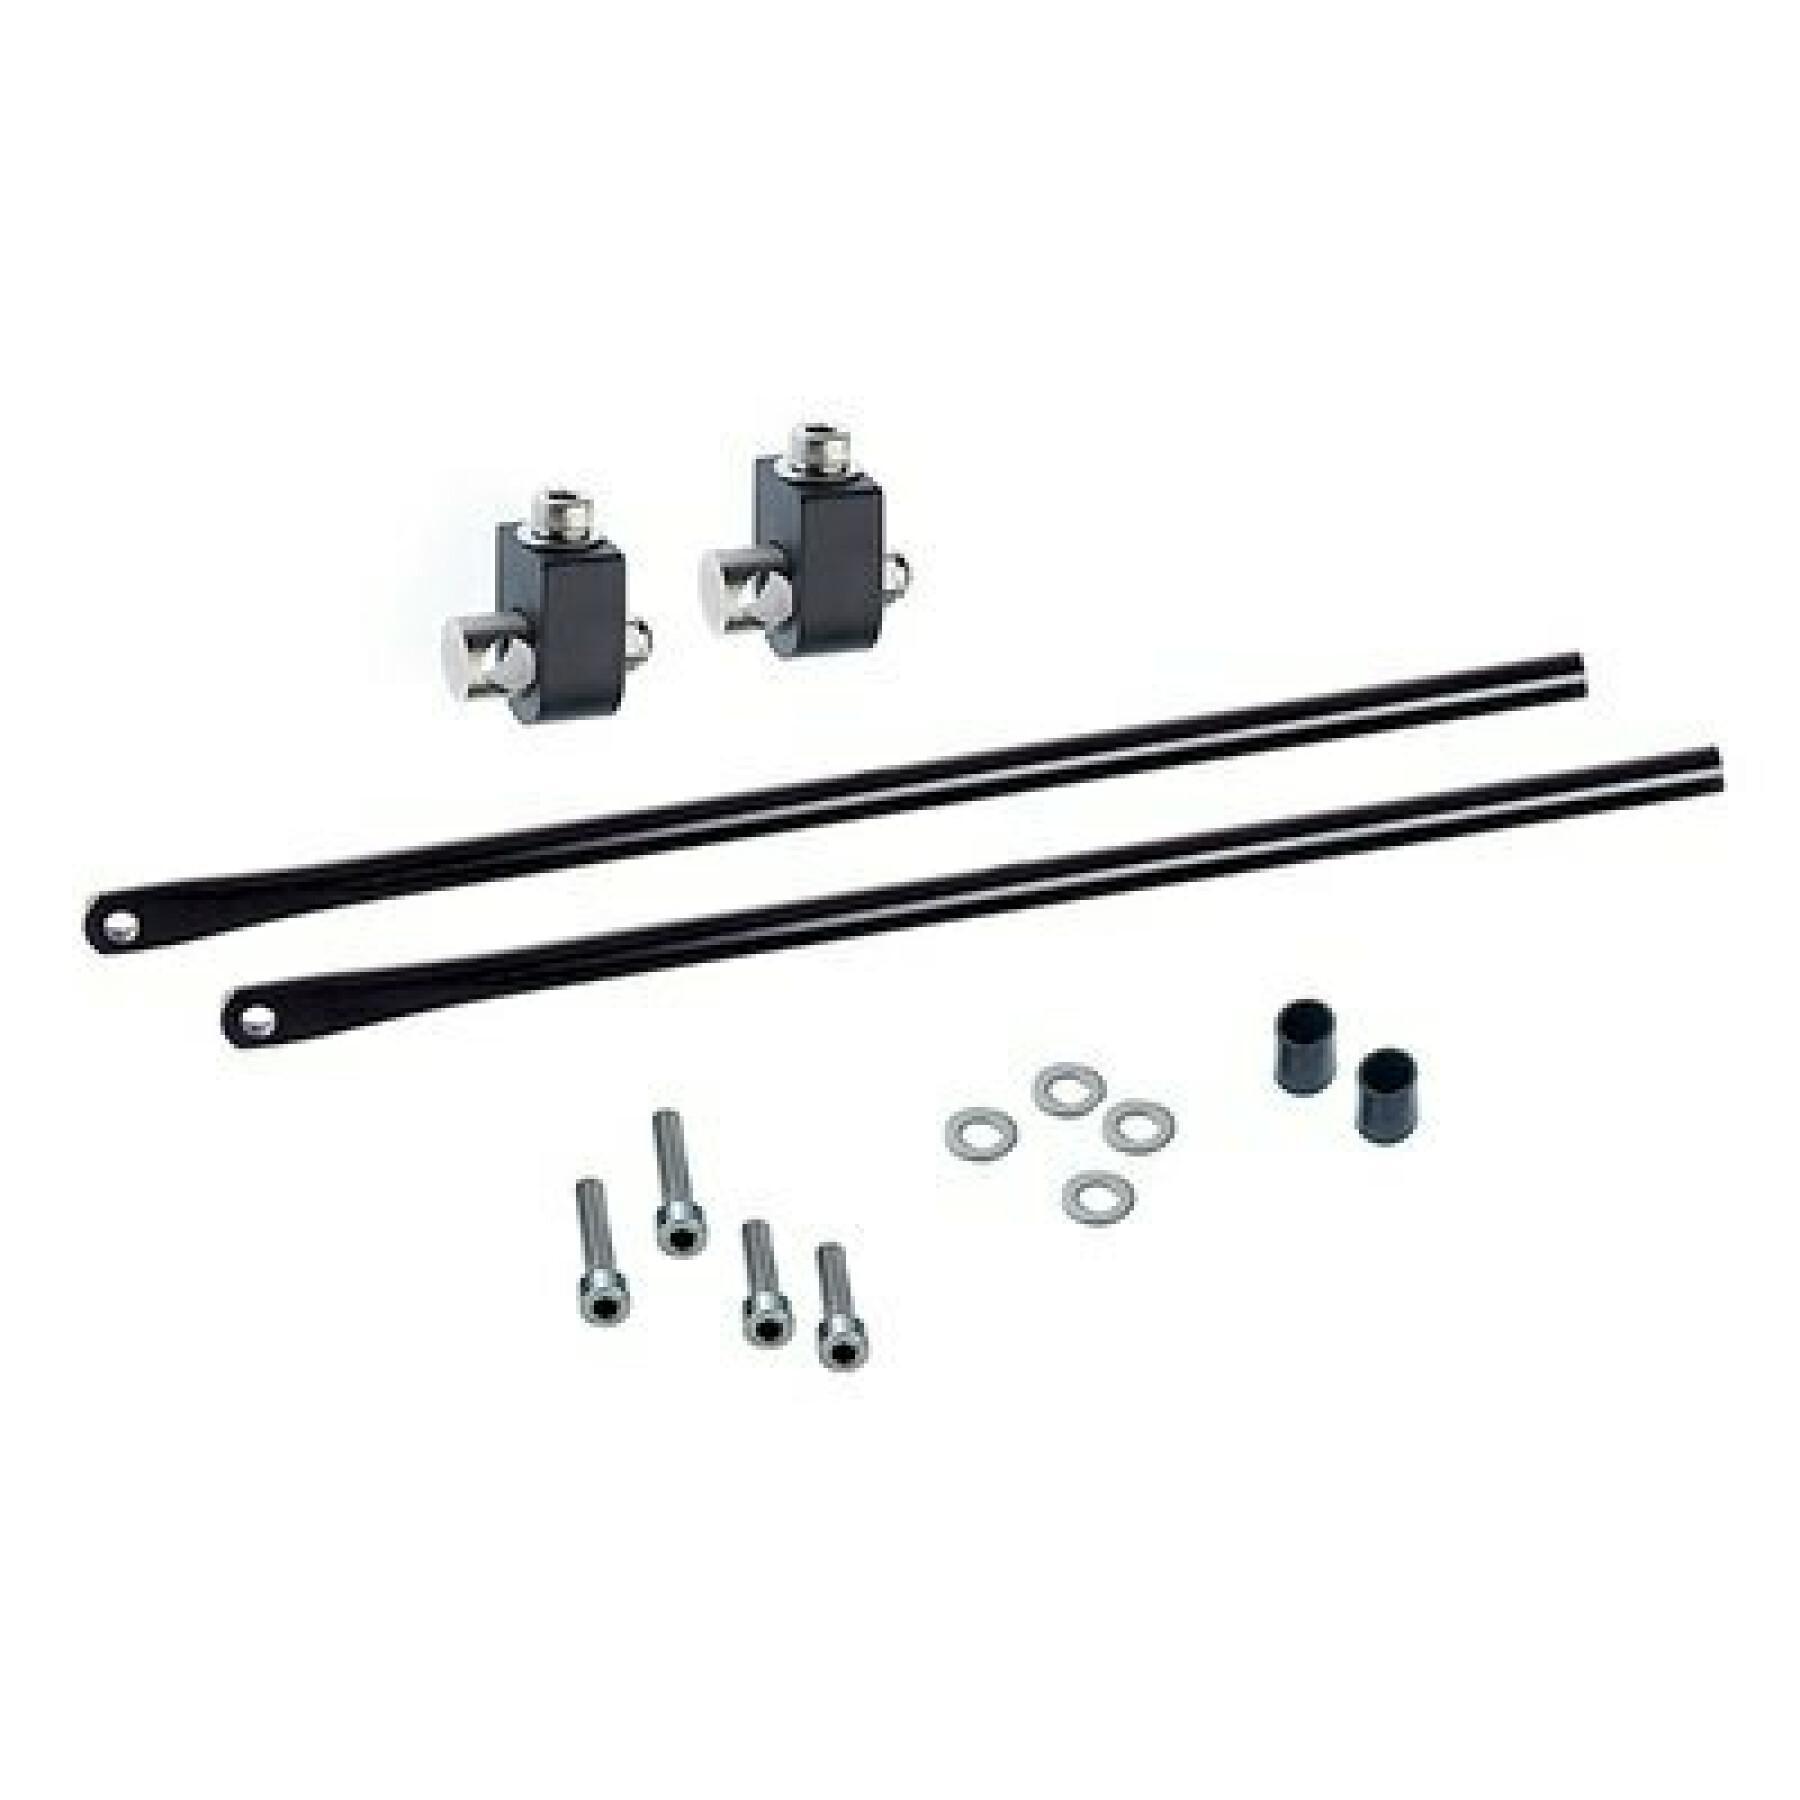 Mounting kit for 2 rods with silver fasteners Tubus